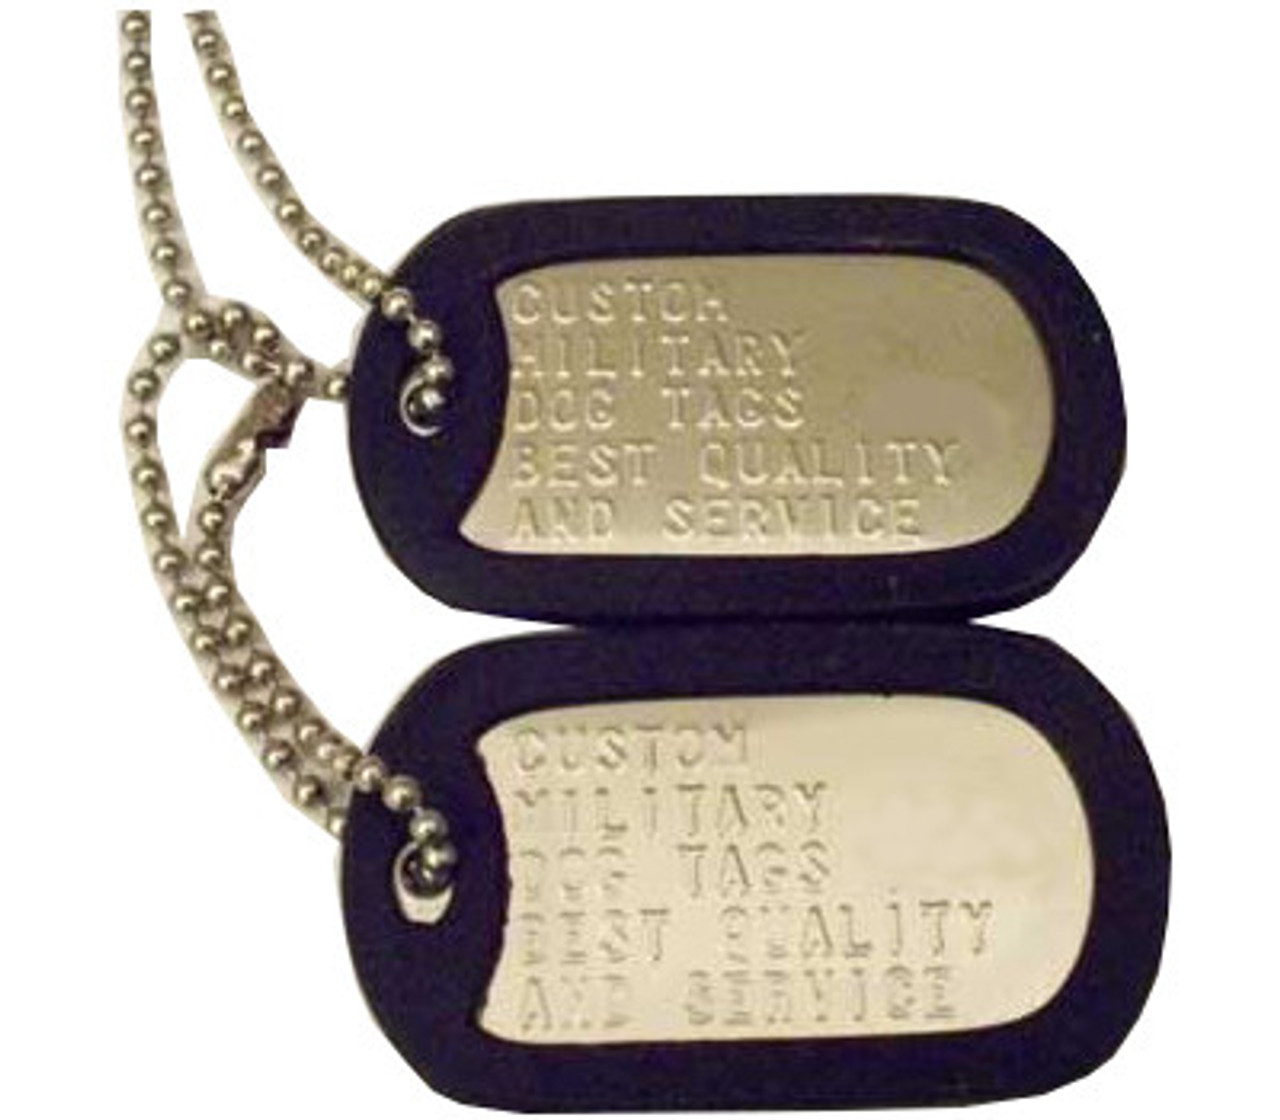 SemperFi Company Dog Tags & Name Tapes Selection 